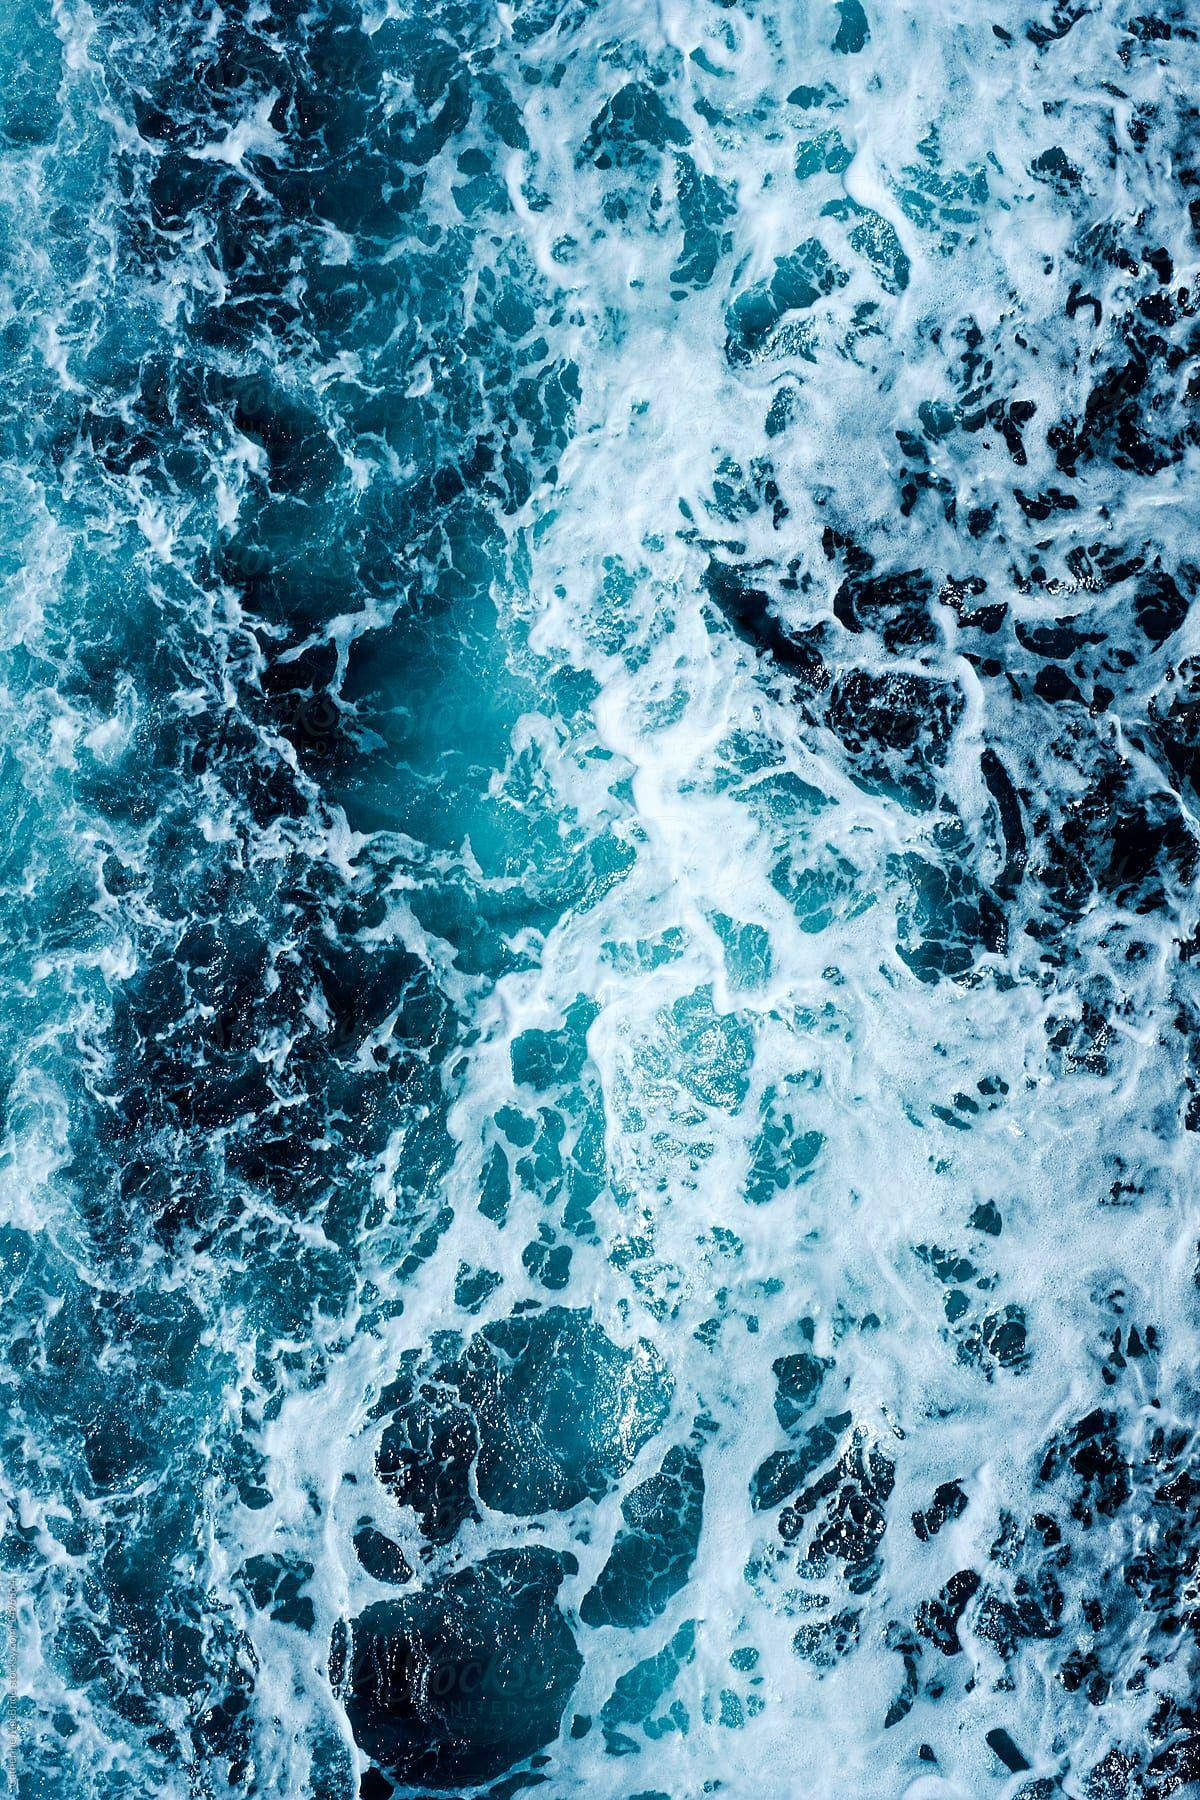 Blue Water With White Foam On The Surface Background